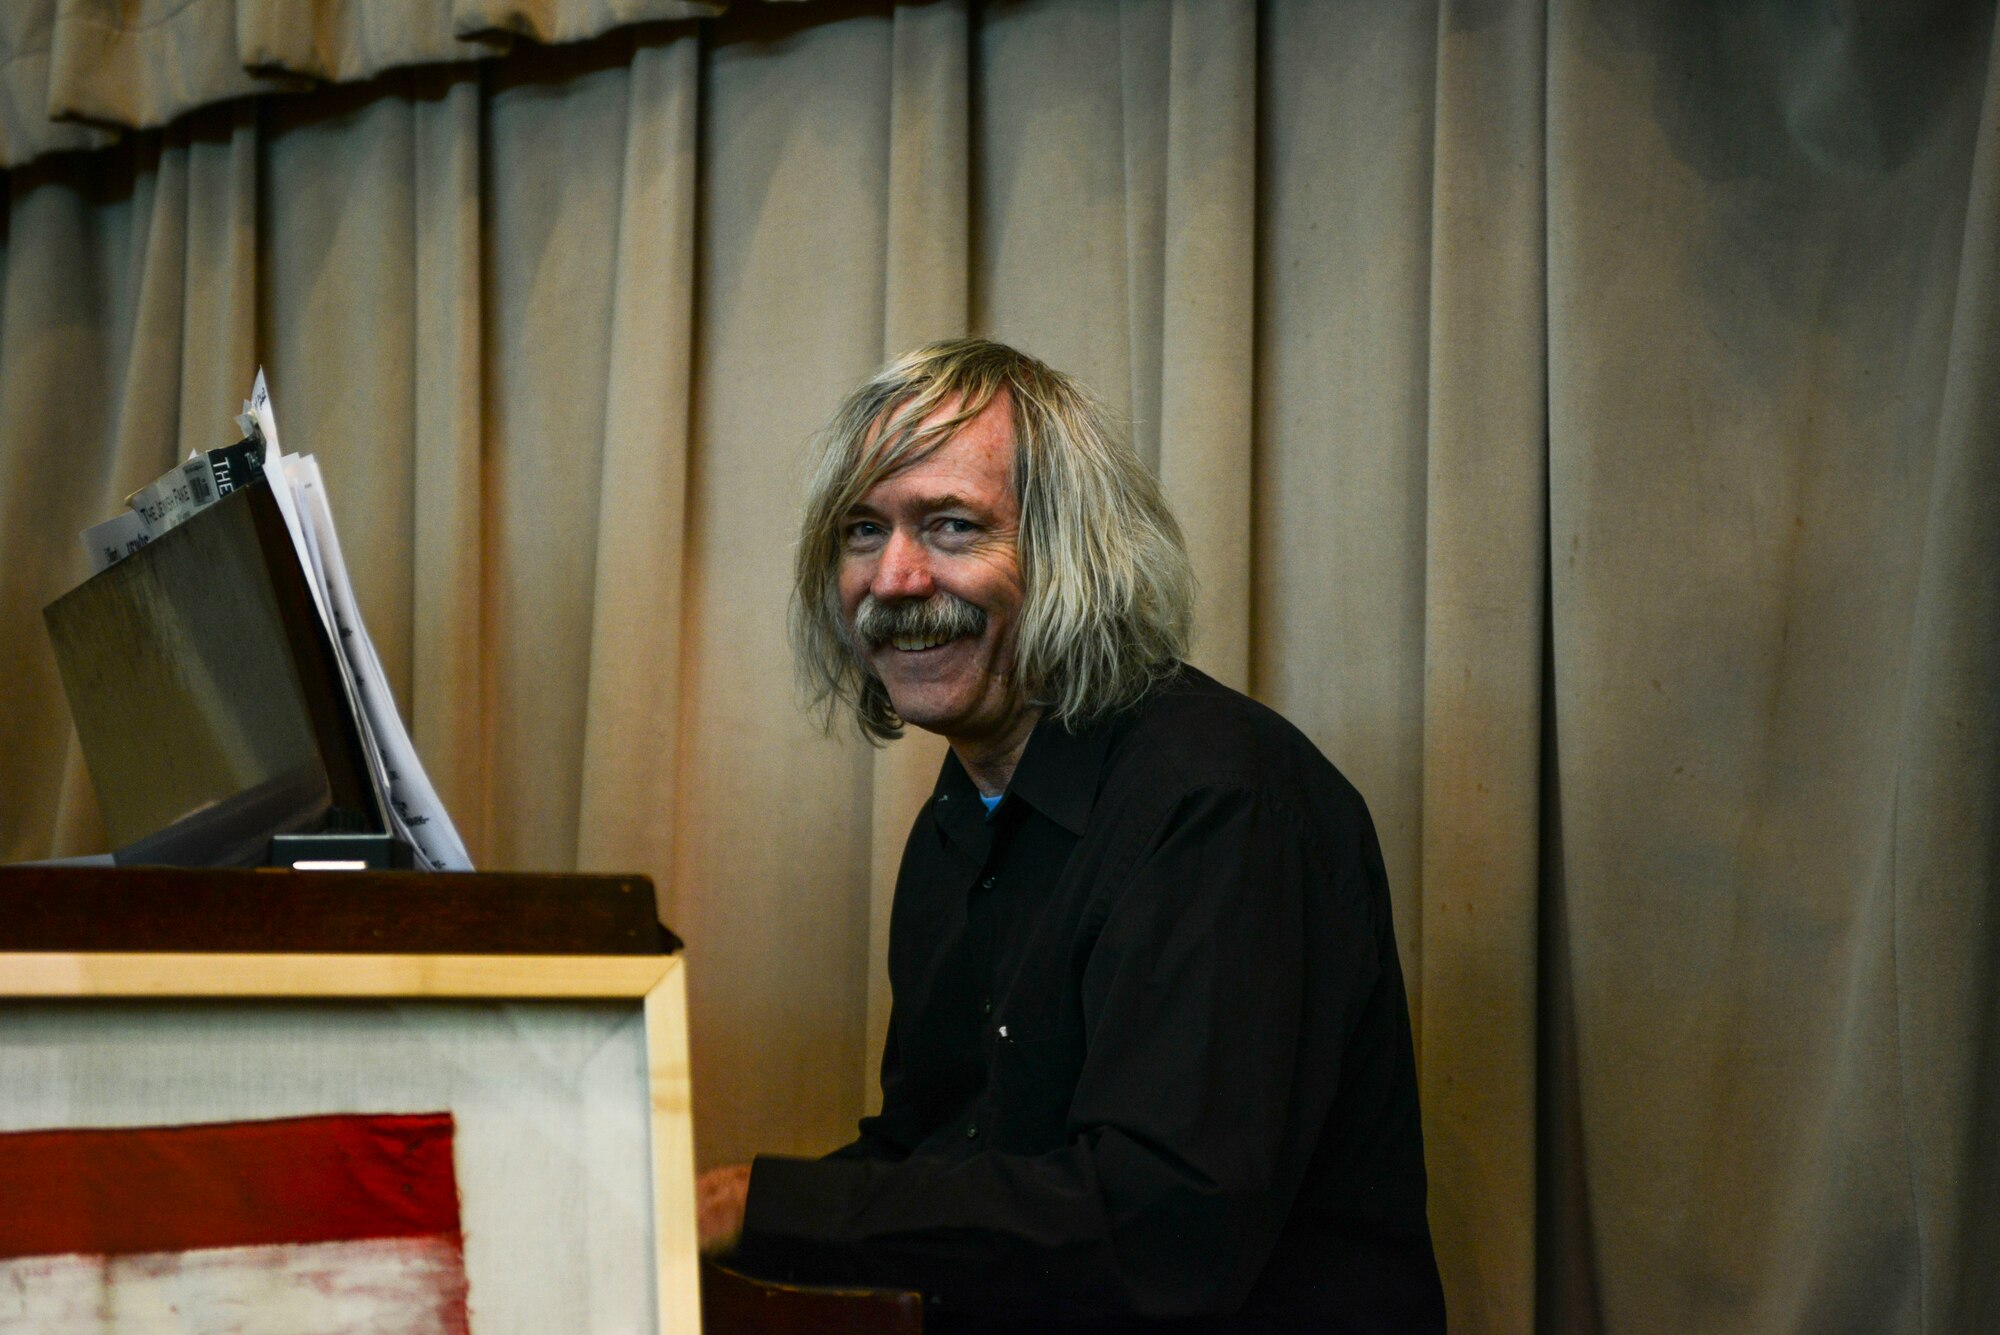 A local pianist plays music for those waiting to see the play “Corrie Remembers,” the true story of a woman who saved nearly 800 Jewish people during the Holocaust, at Kirtland Air Force Base, N.M., May 3, 2019. The Kirtland AFB Chaplain Corps hosts an annual Days of Remembrance event to honor the lives lost and those who survived.